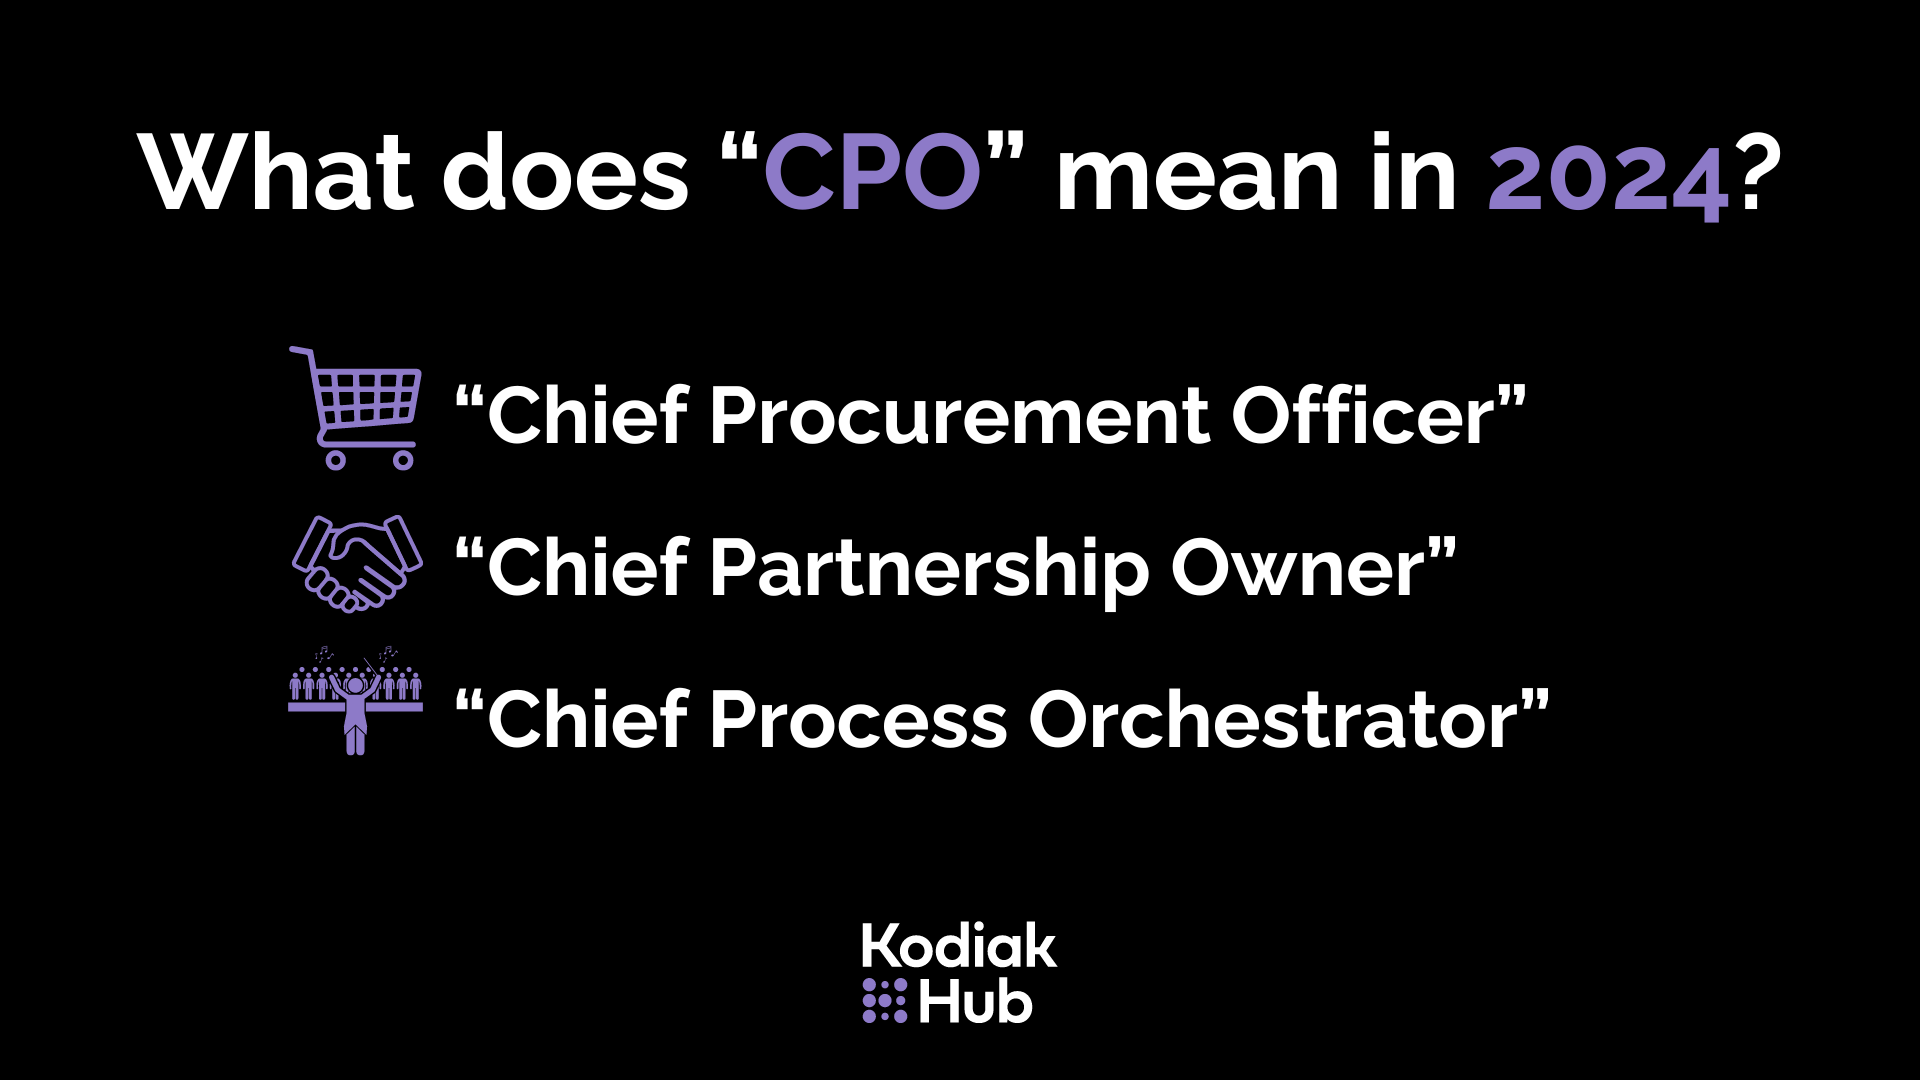 What does “CPO” mean in 2024